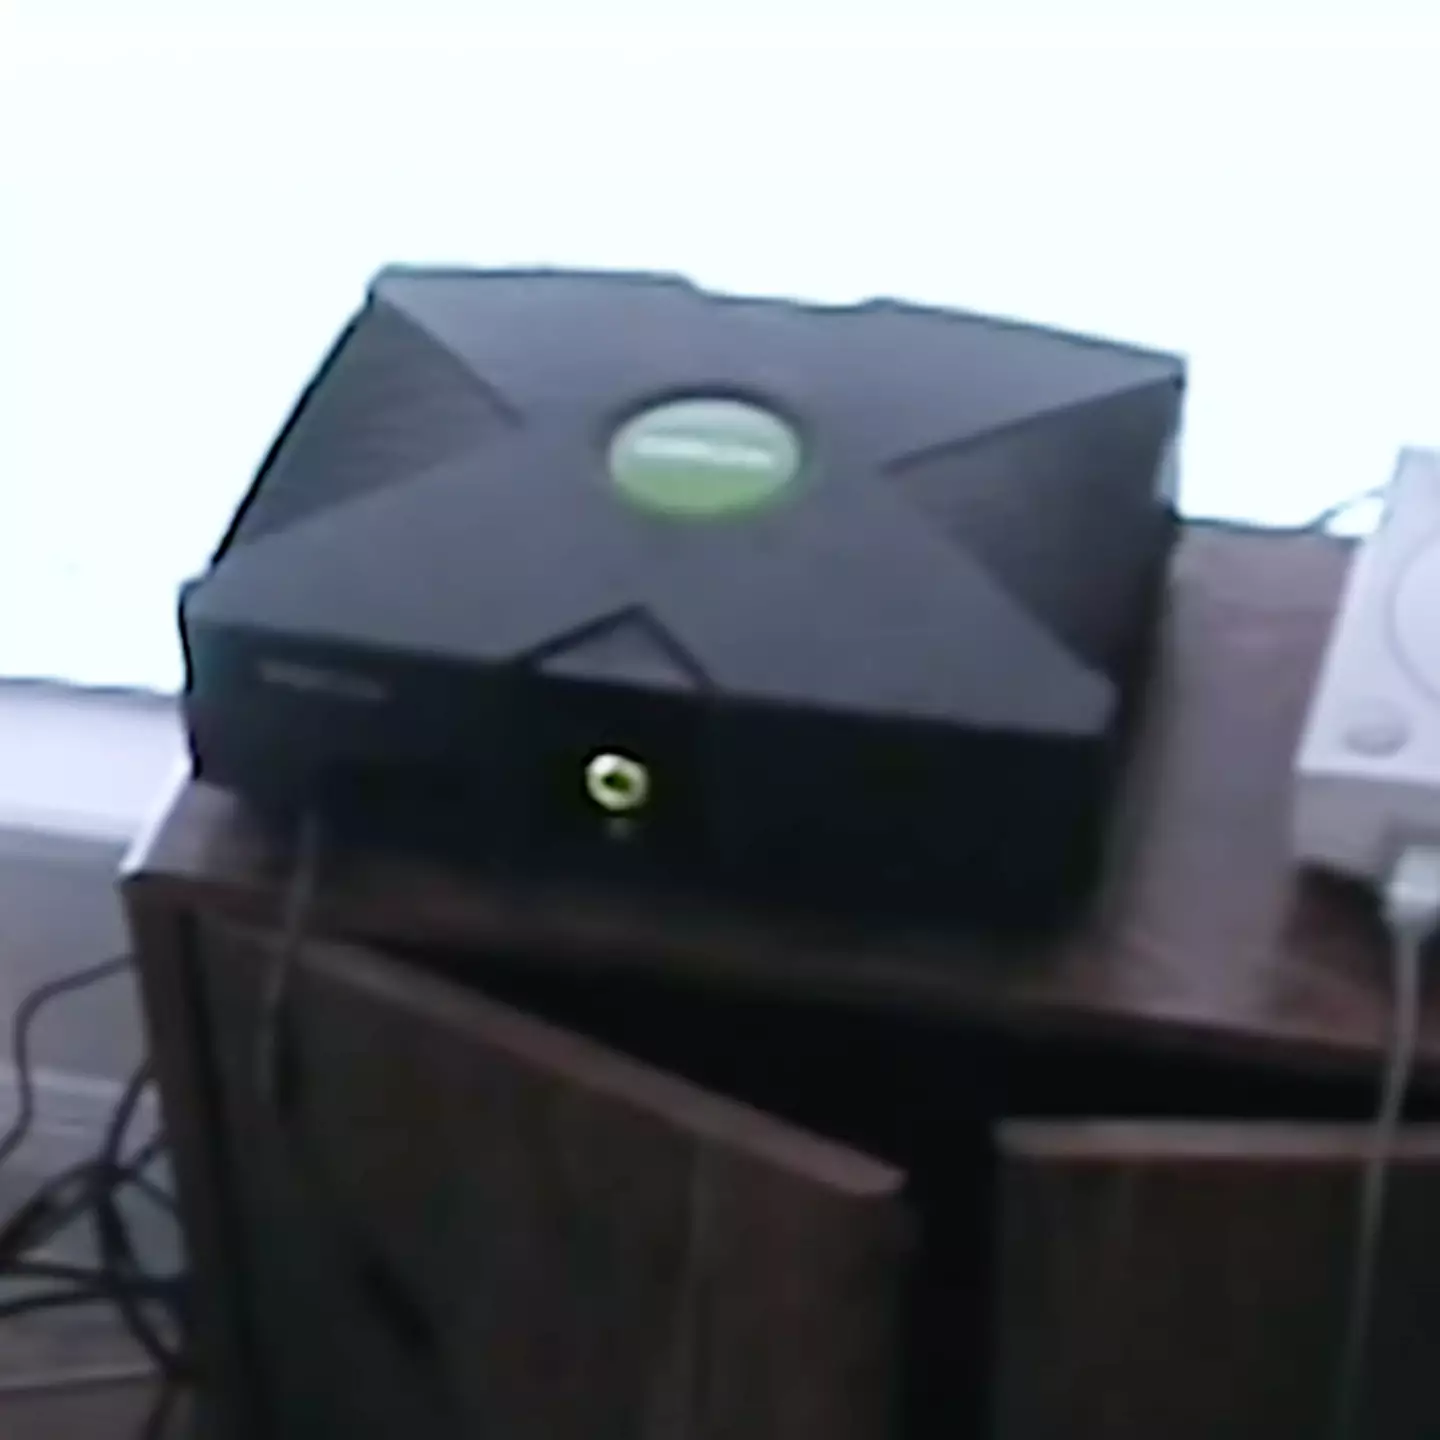 Everyone has the same complaint after seeing footage of booting up an original Xbox